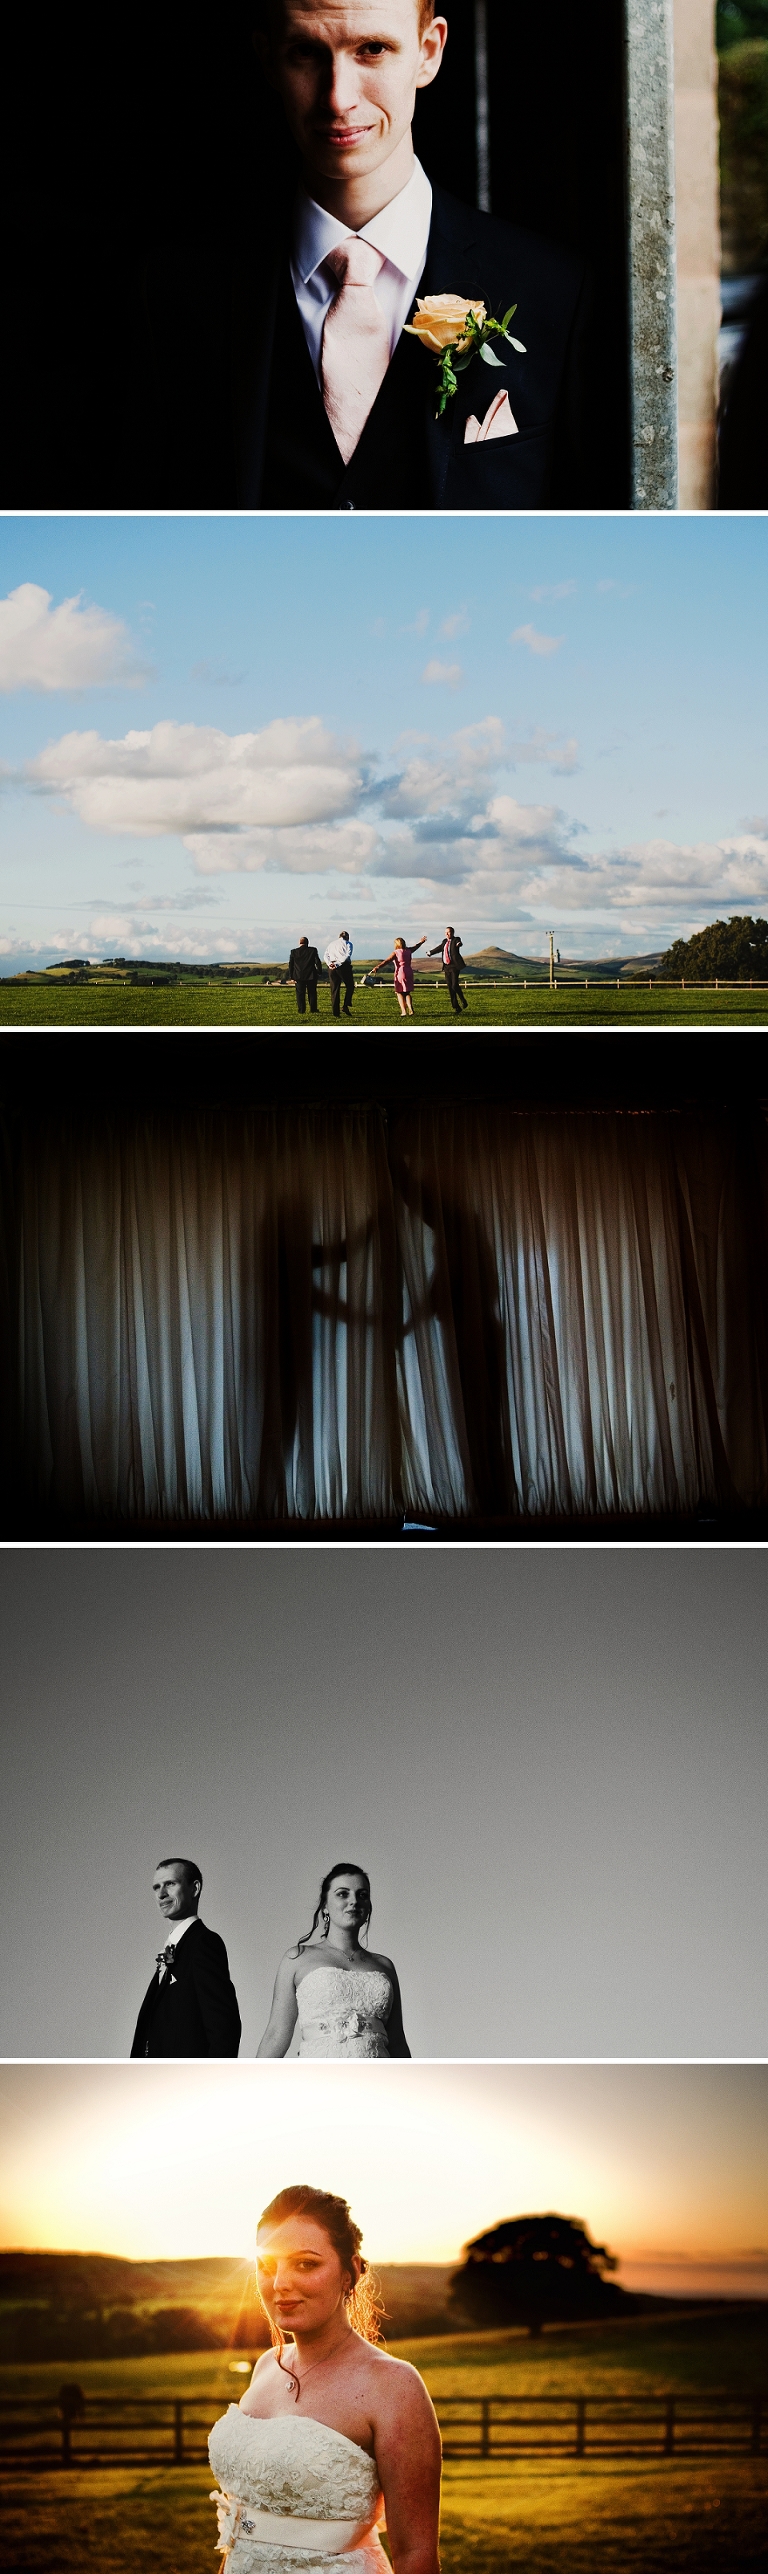 Bride and groom sunset portraits at a countryside wedding venue